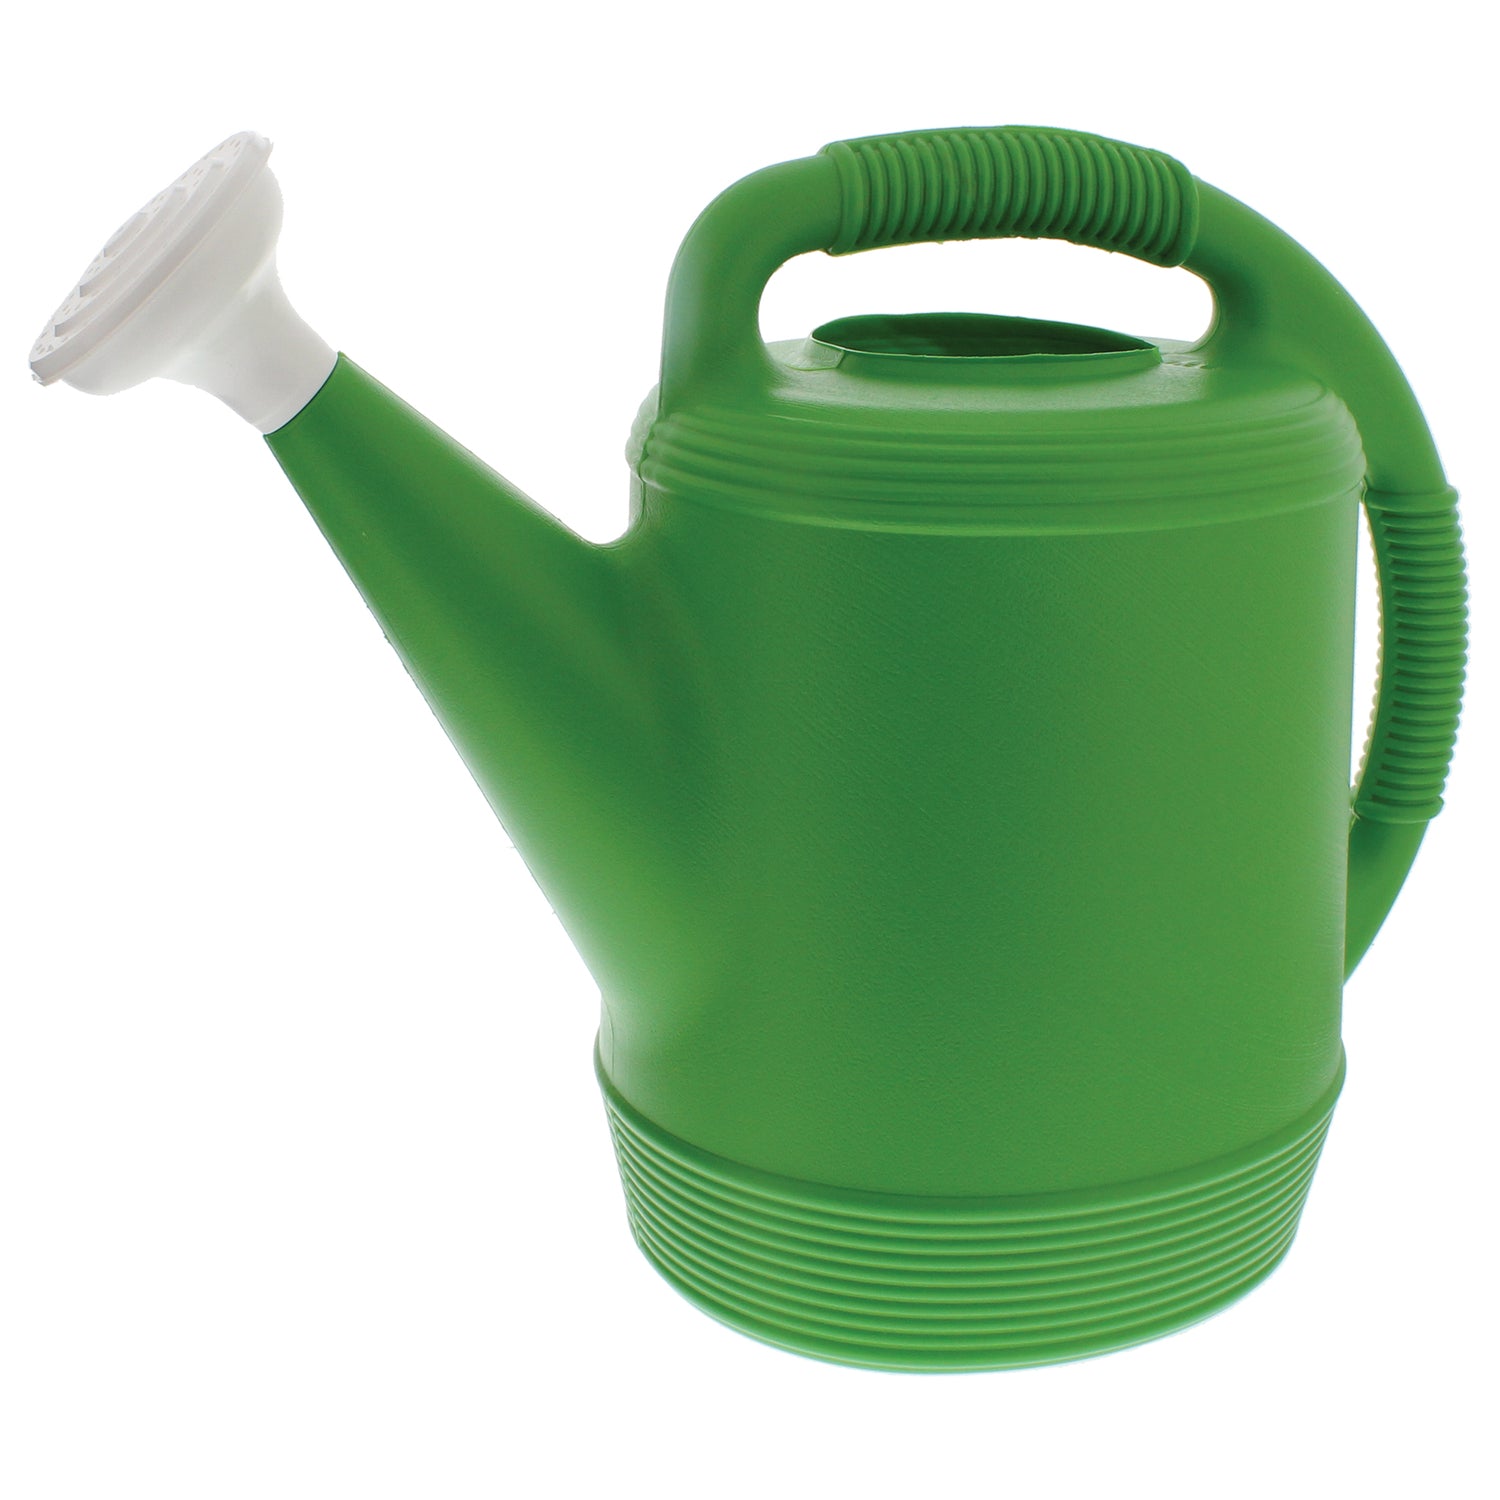 Misco Plastic Watering Can, 2-Gallon, Colors May Vary